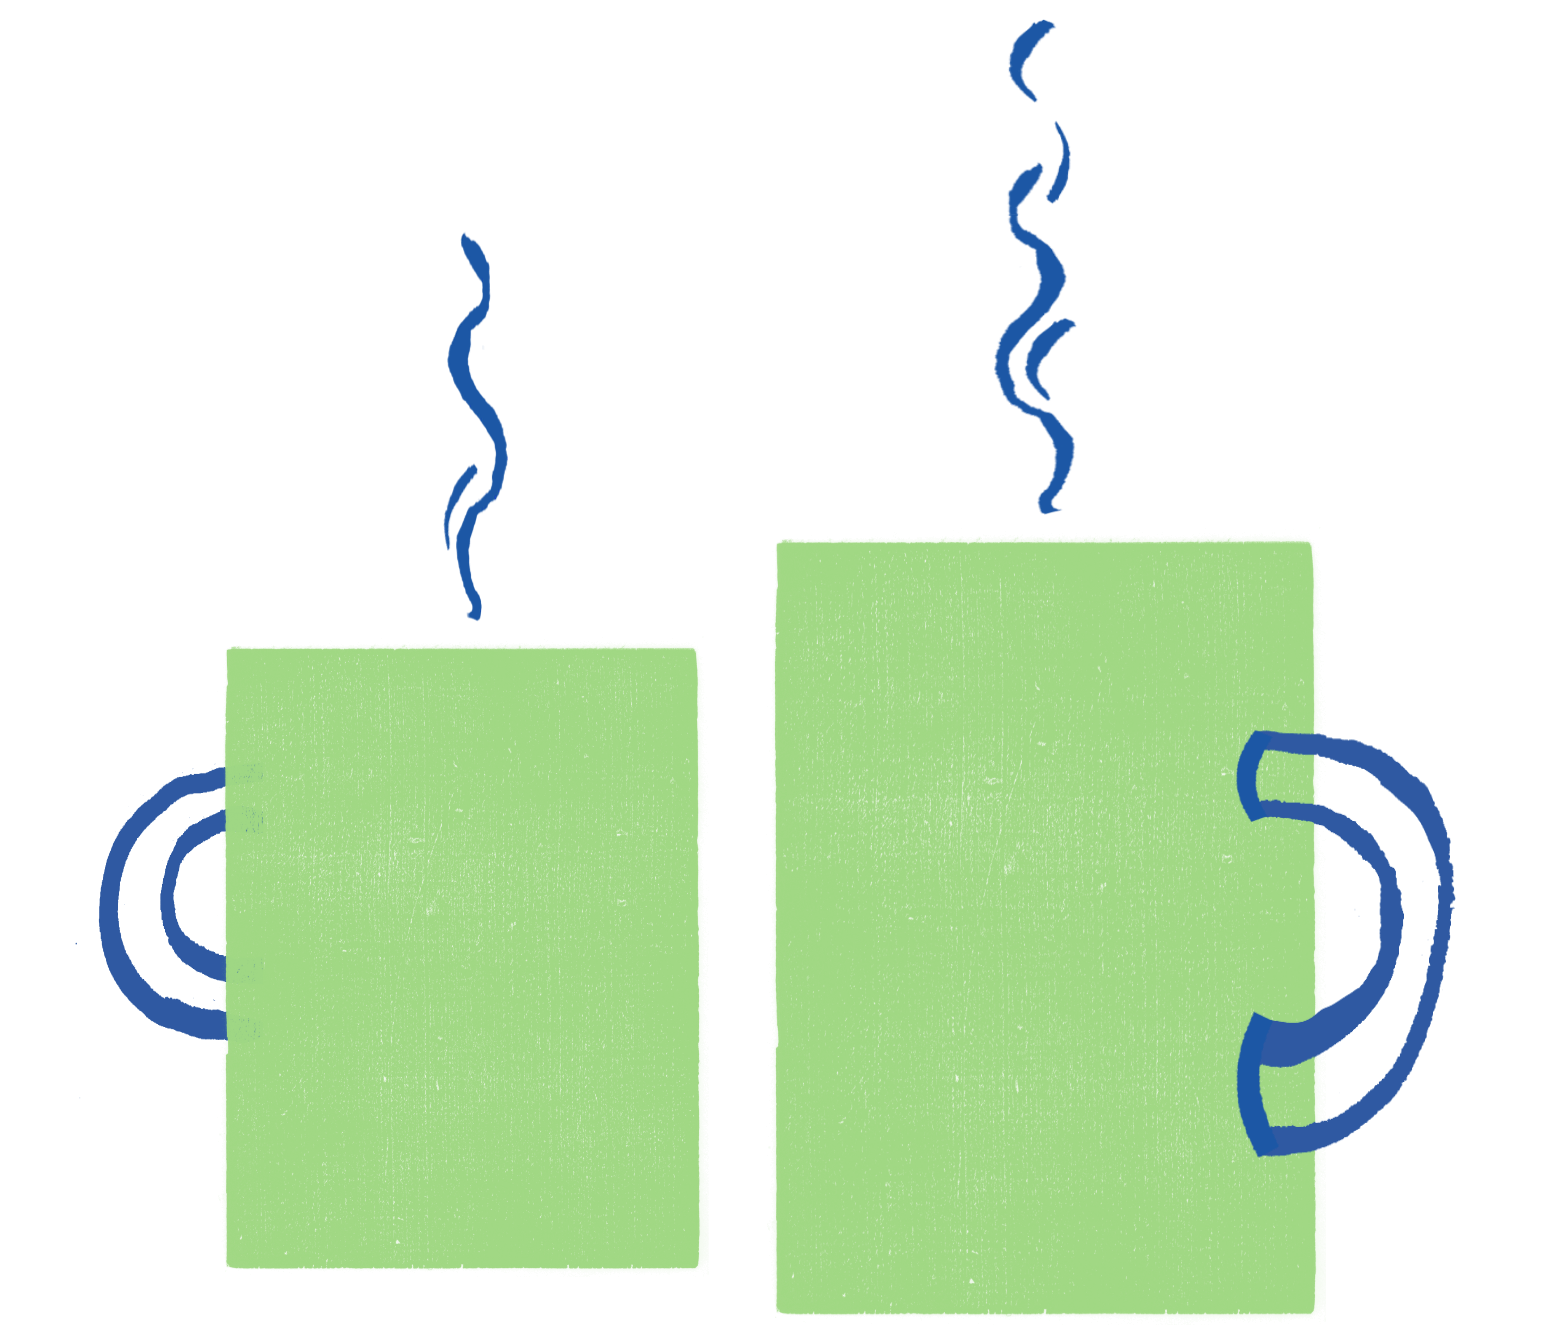 Illustration of two mugs of coffee